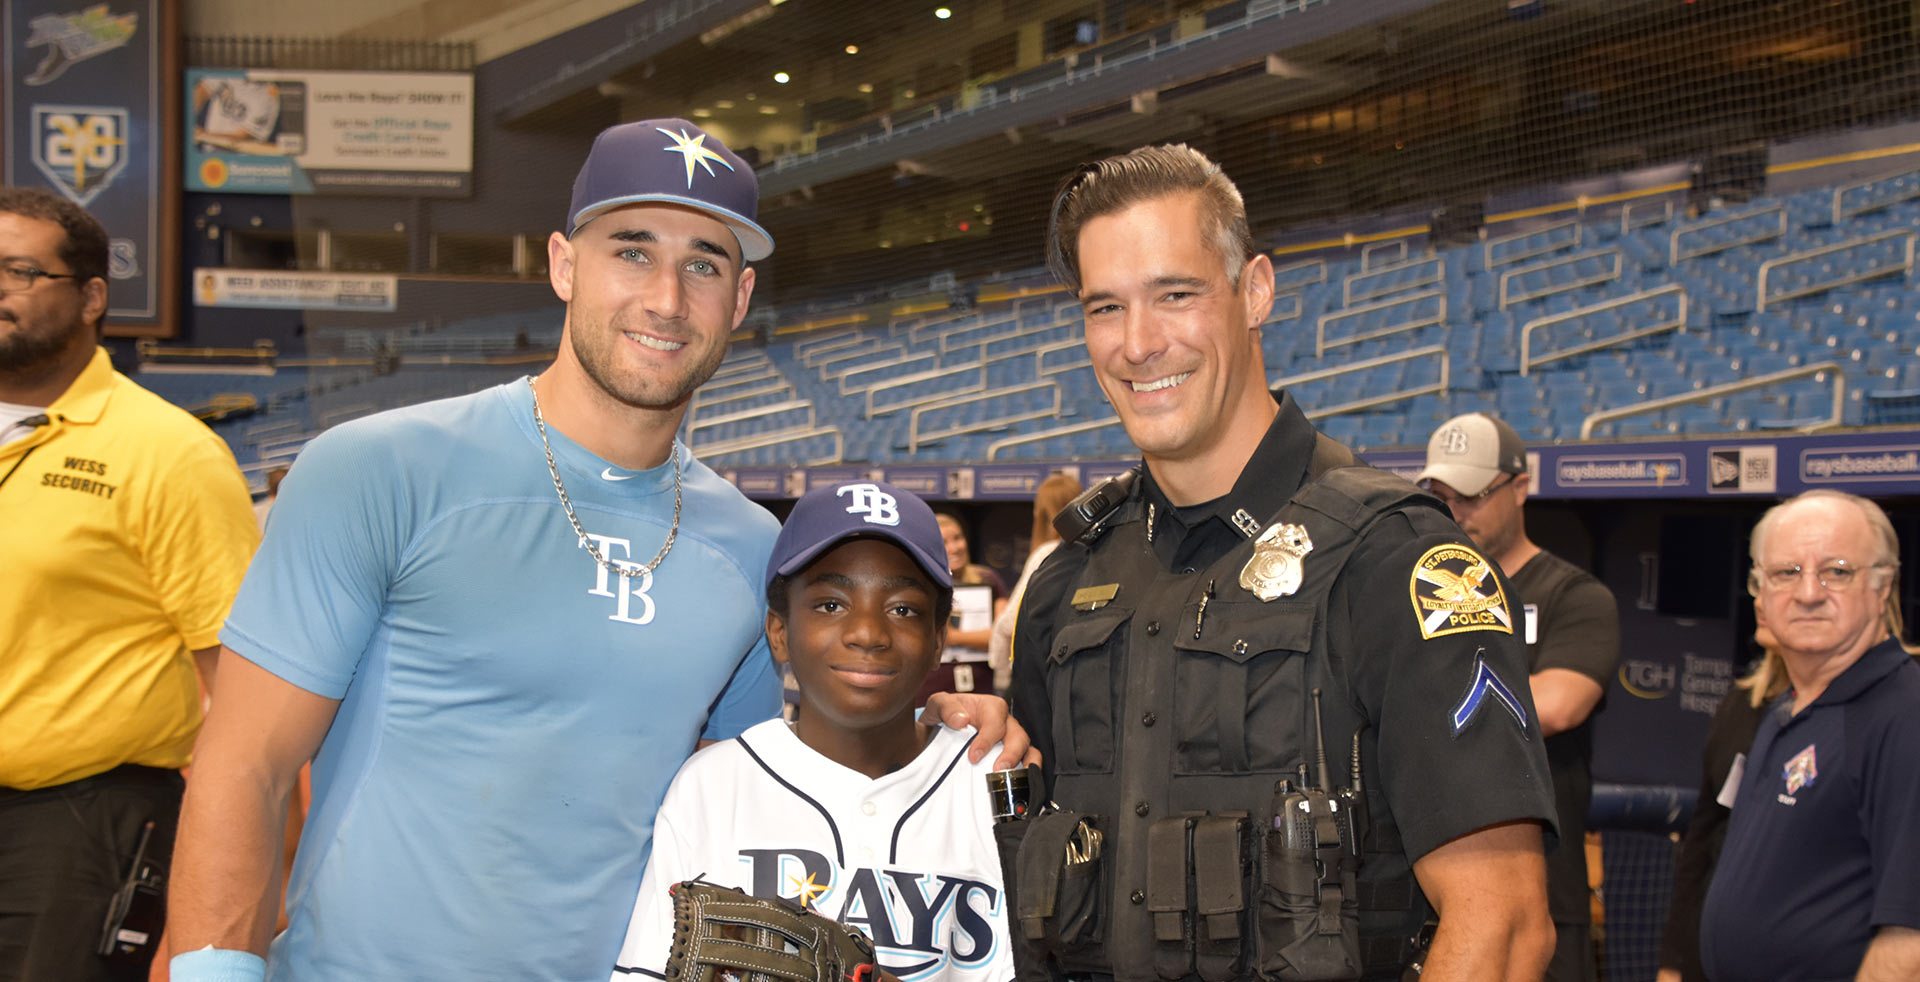 Officer and Tampa Bay Rays player with child